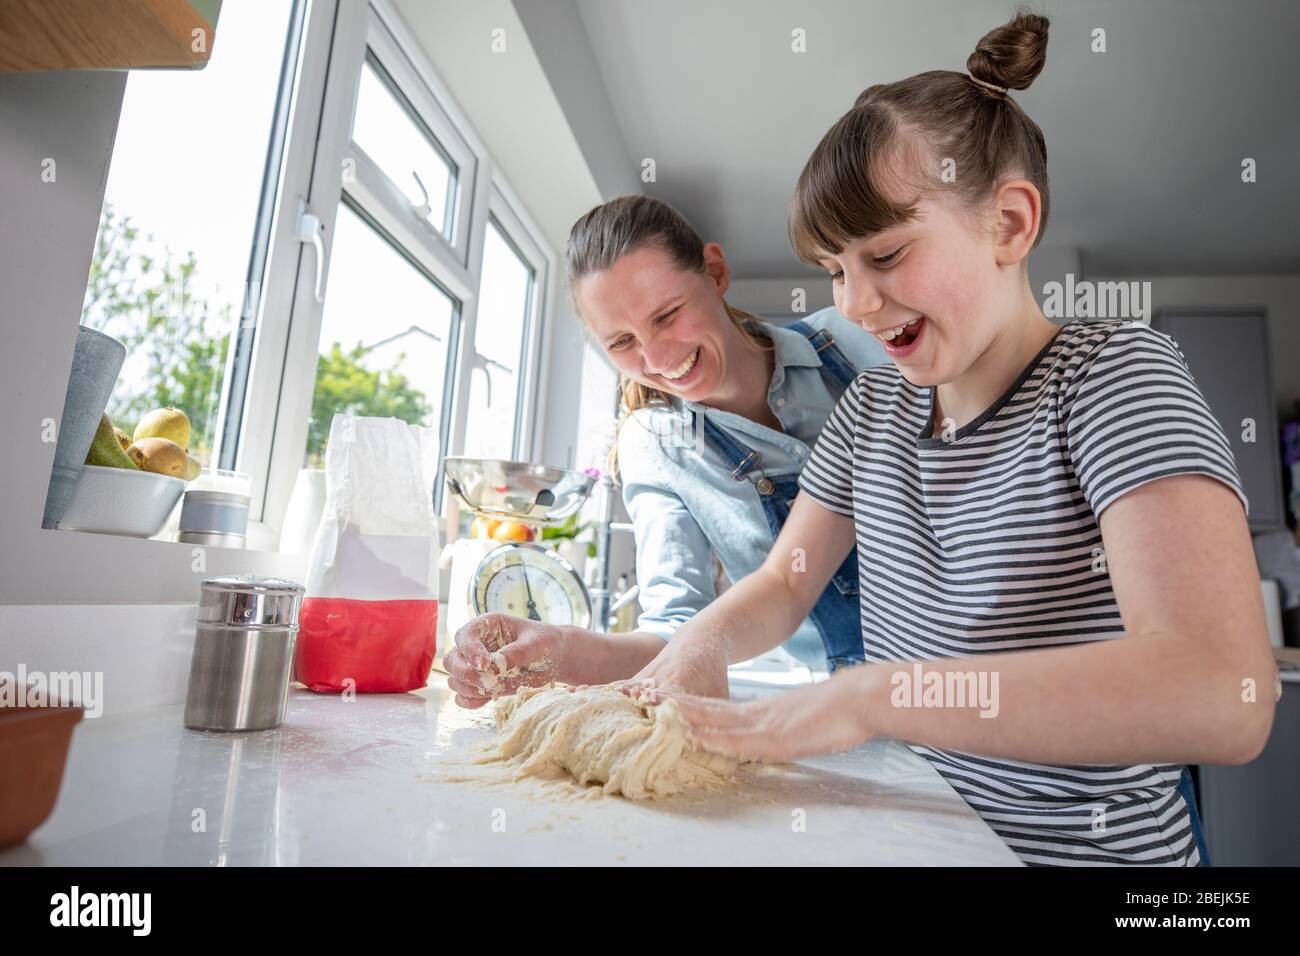 Mother And Daughter Having Fun In Kitchen At Making Dough For Home Baked Bread Together Stock Photo